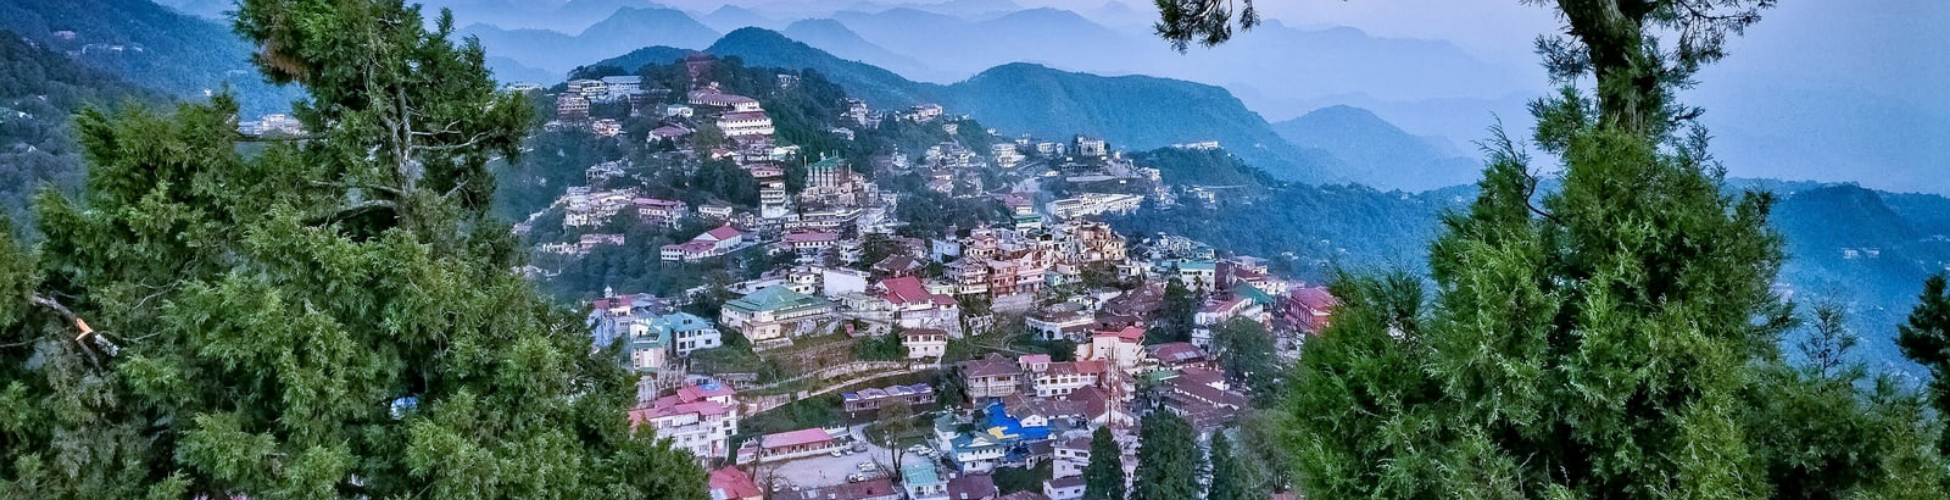 Best Selling Uttarakhand Tour packages from Bangalore